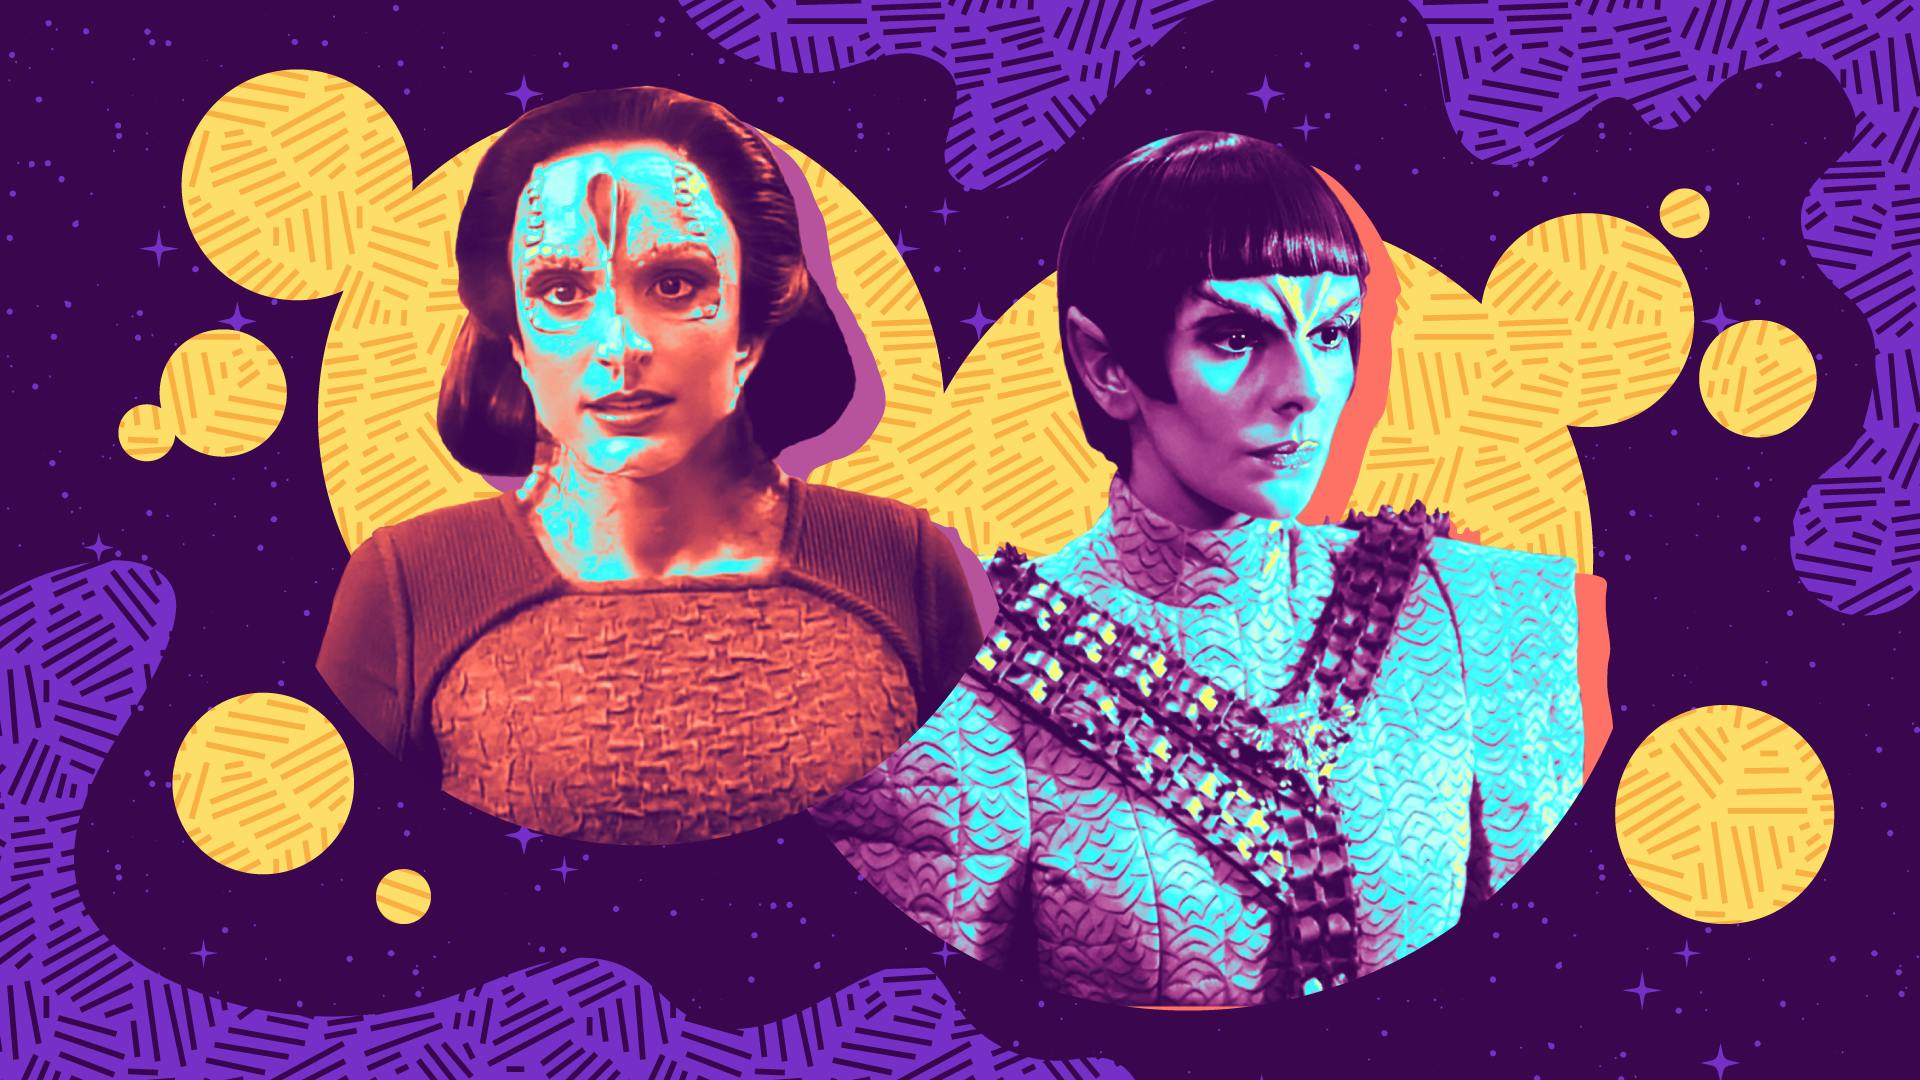 Illustrated banner featuring stylized images of Major Kira as a Cardassian and Counselor Deanna Troi as a Romulan